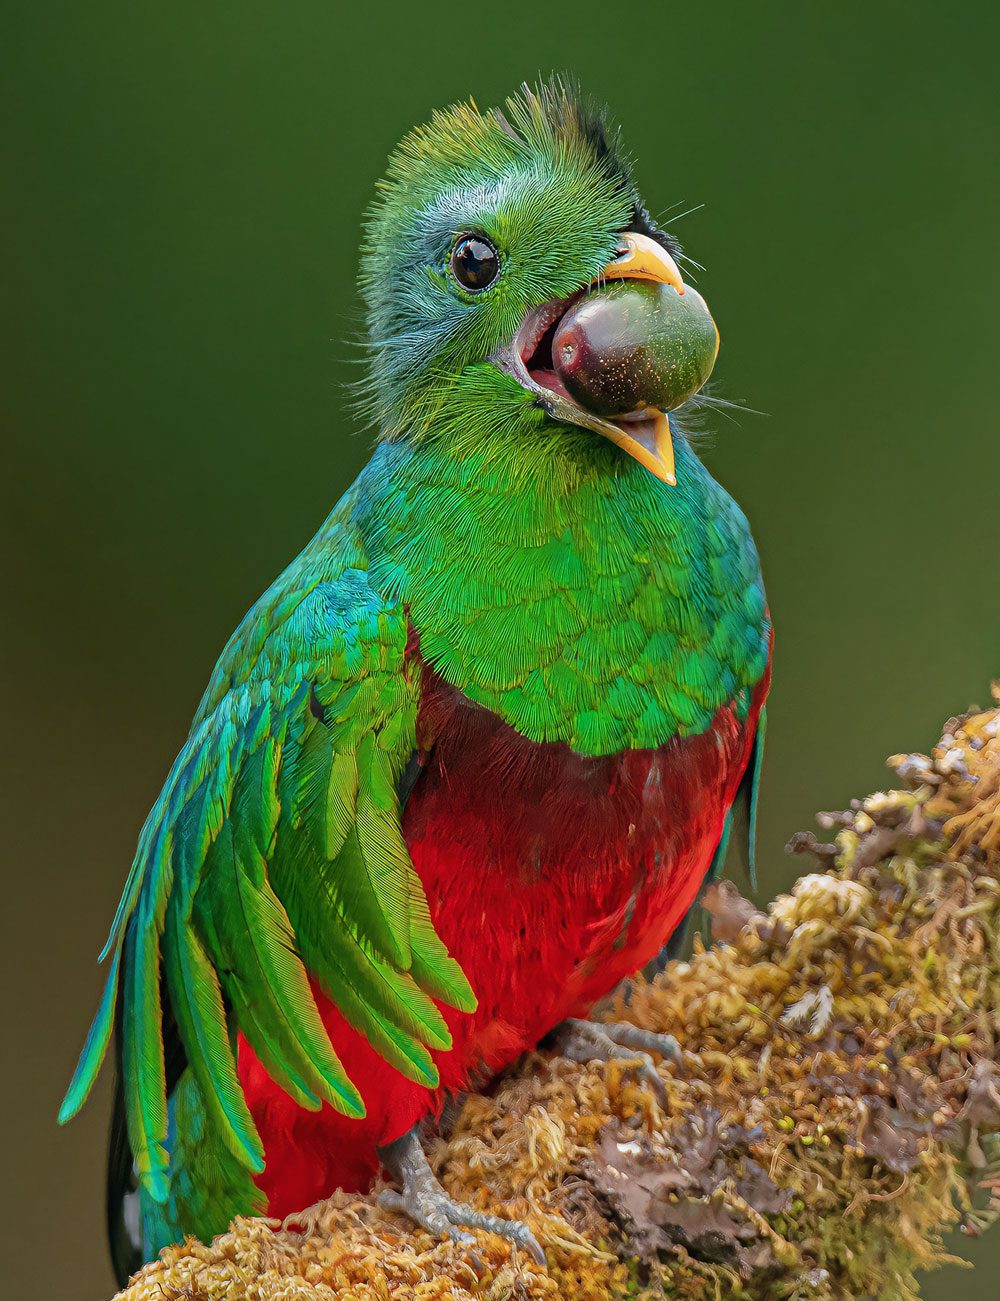 A male quetzal, a green-and-red bird, with a fruit in its bill.